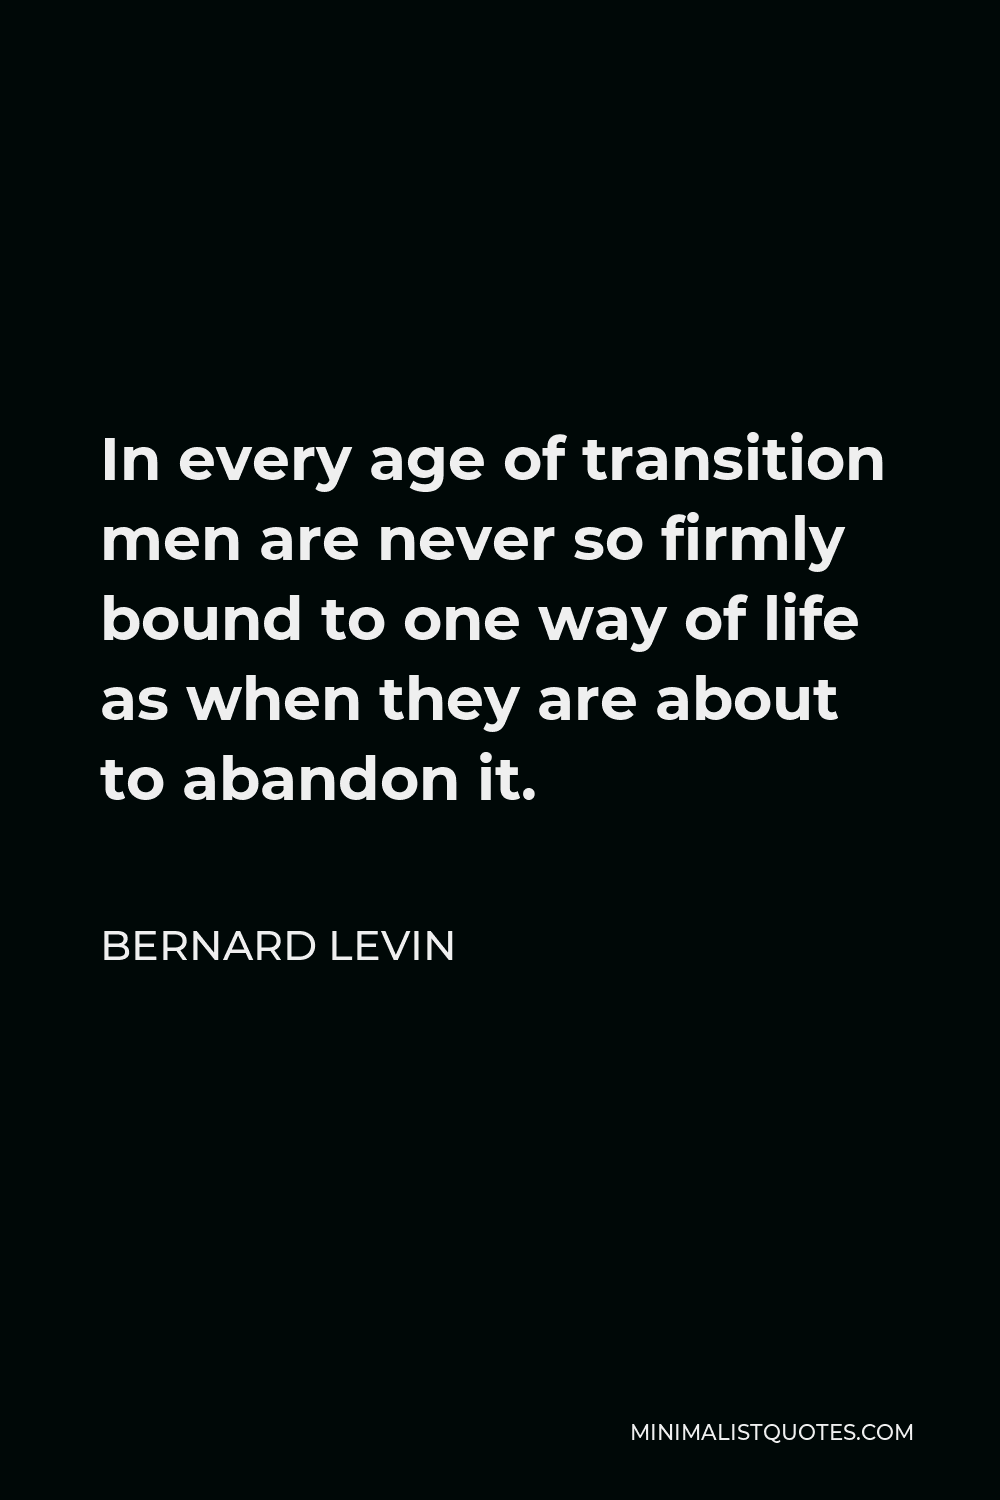 Bernard Levin Quote - In every age of transition men are never so firmly bound to one way of life as when they are about to abandon it.